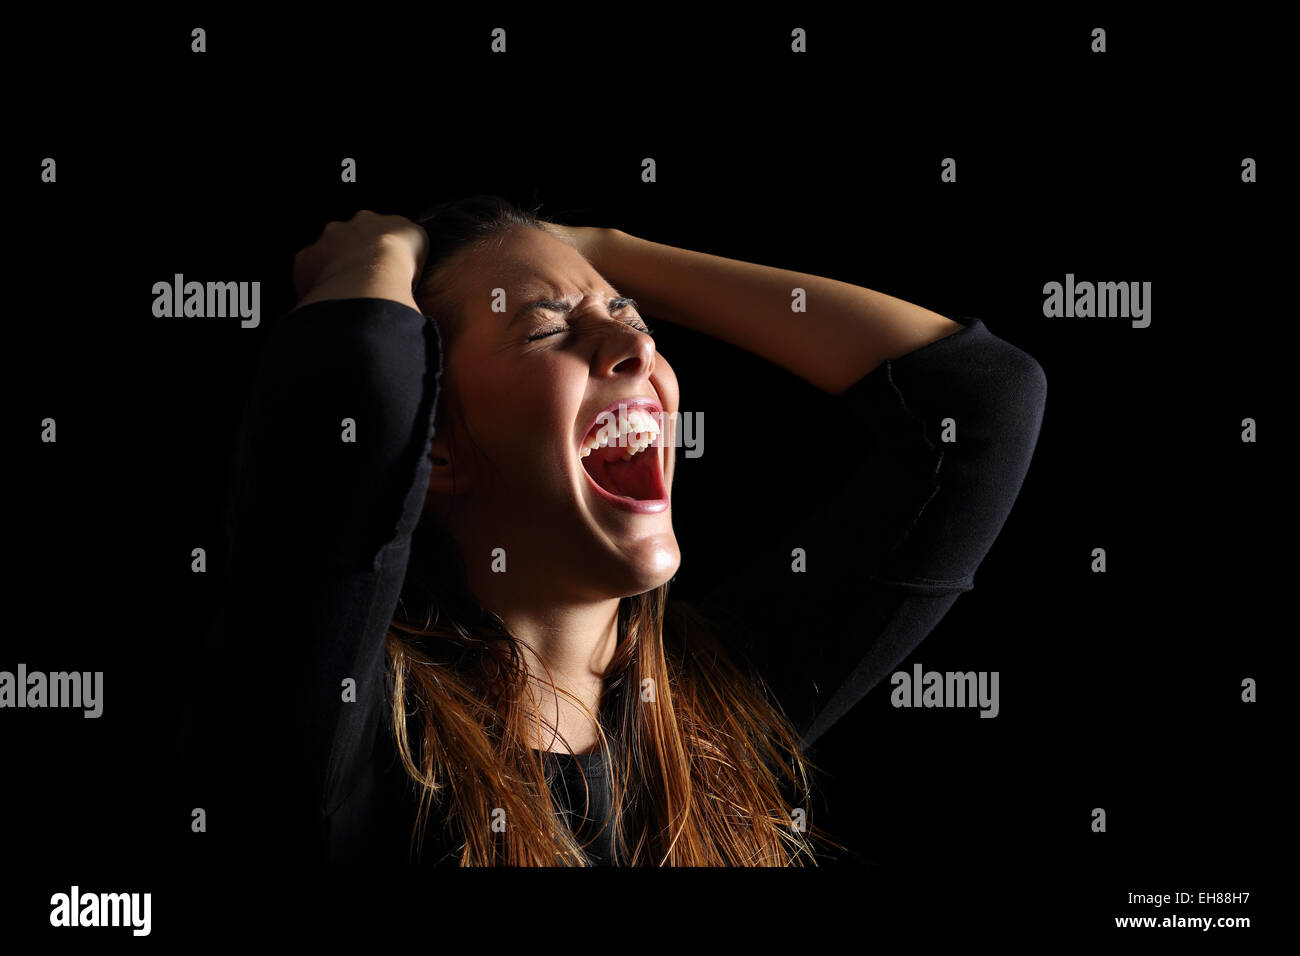 Depressed woman crying and shouting desperately isolated in a black background Stock Photo